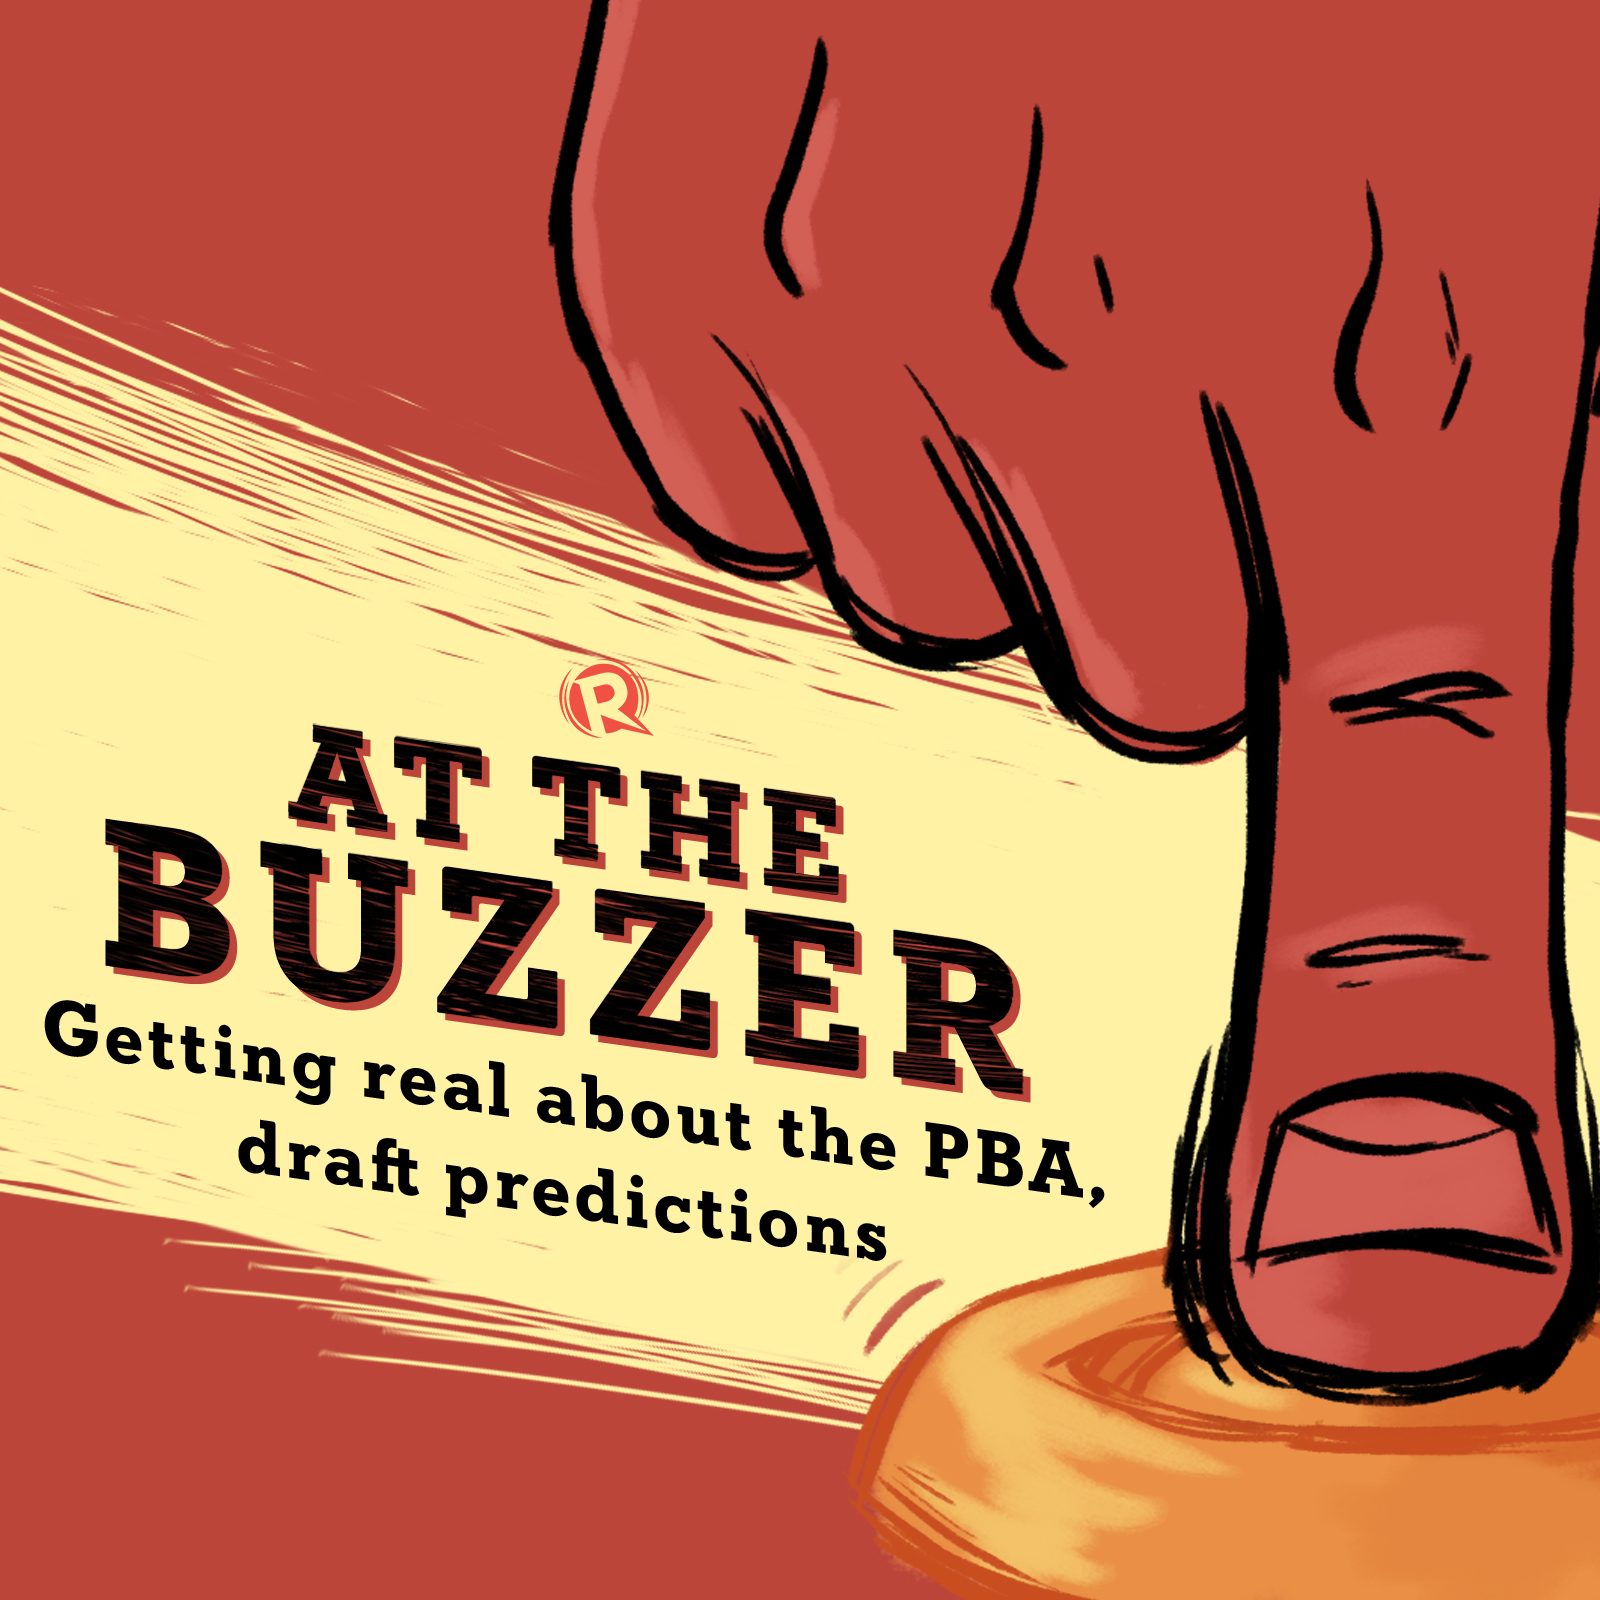 [PODCAST] At the Buzzer: Getting real about the PBA, draft predictions